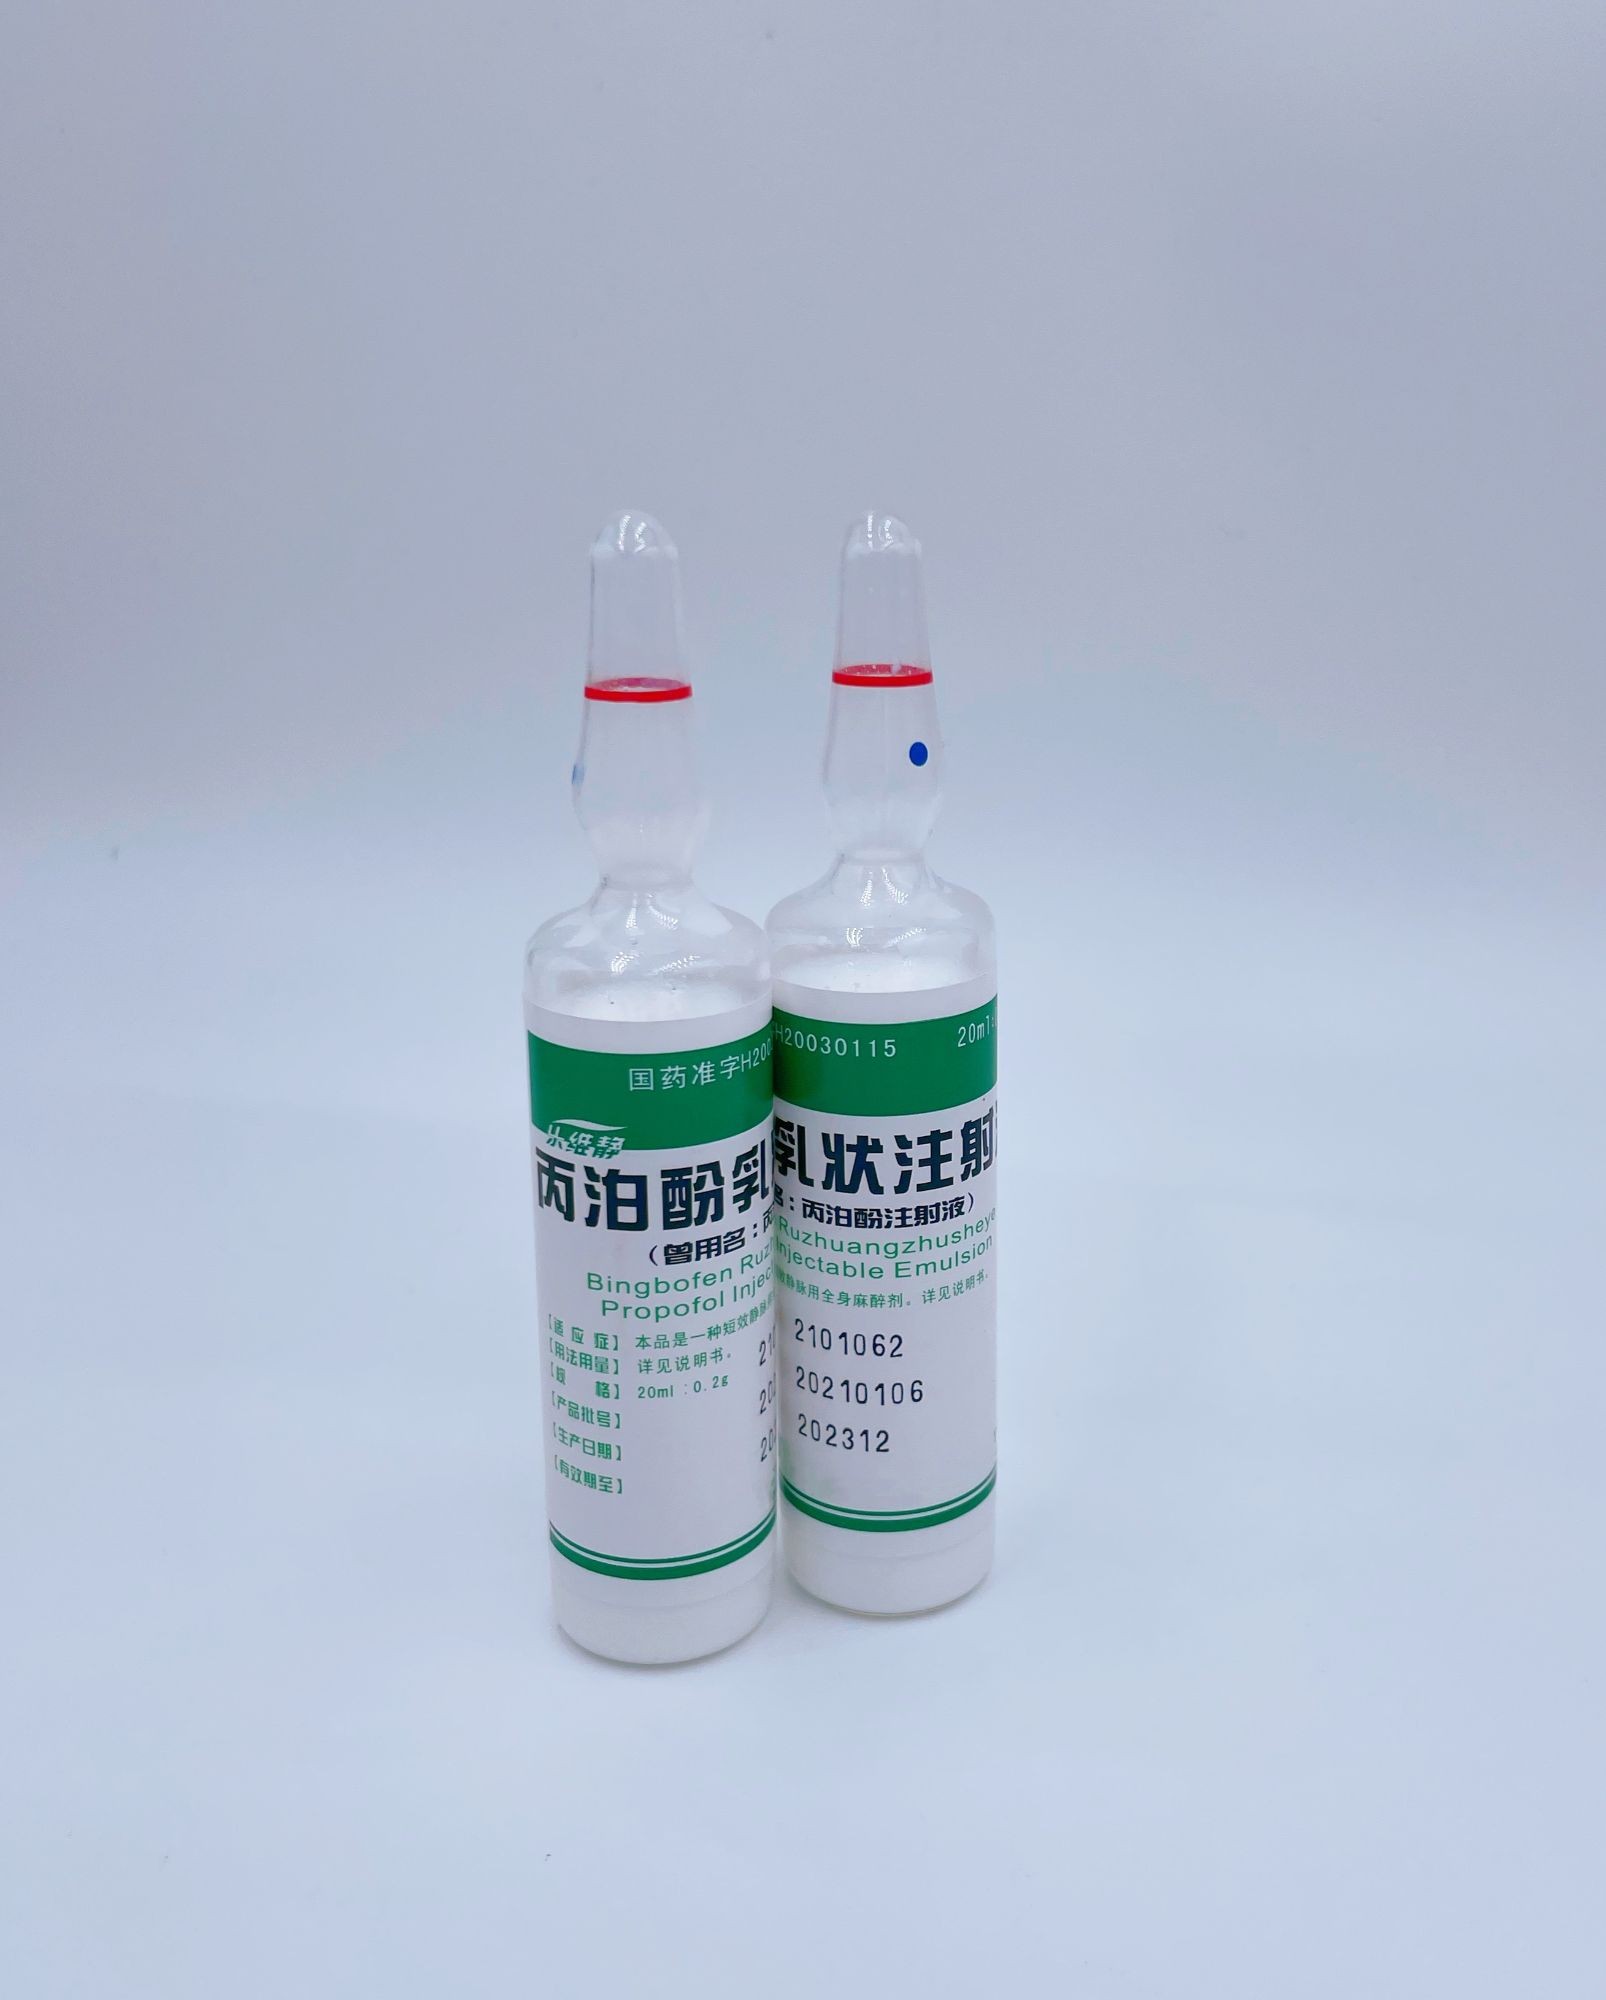 0.2 g/20 ml 1% Propofol Emulsione Injectable